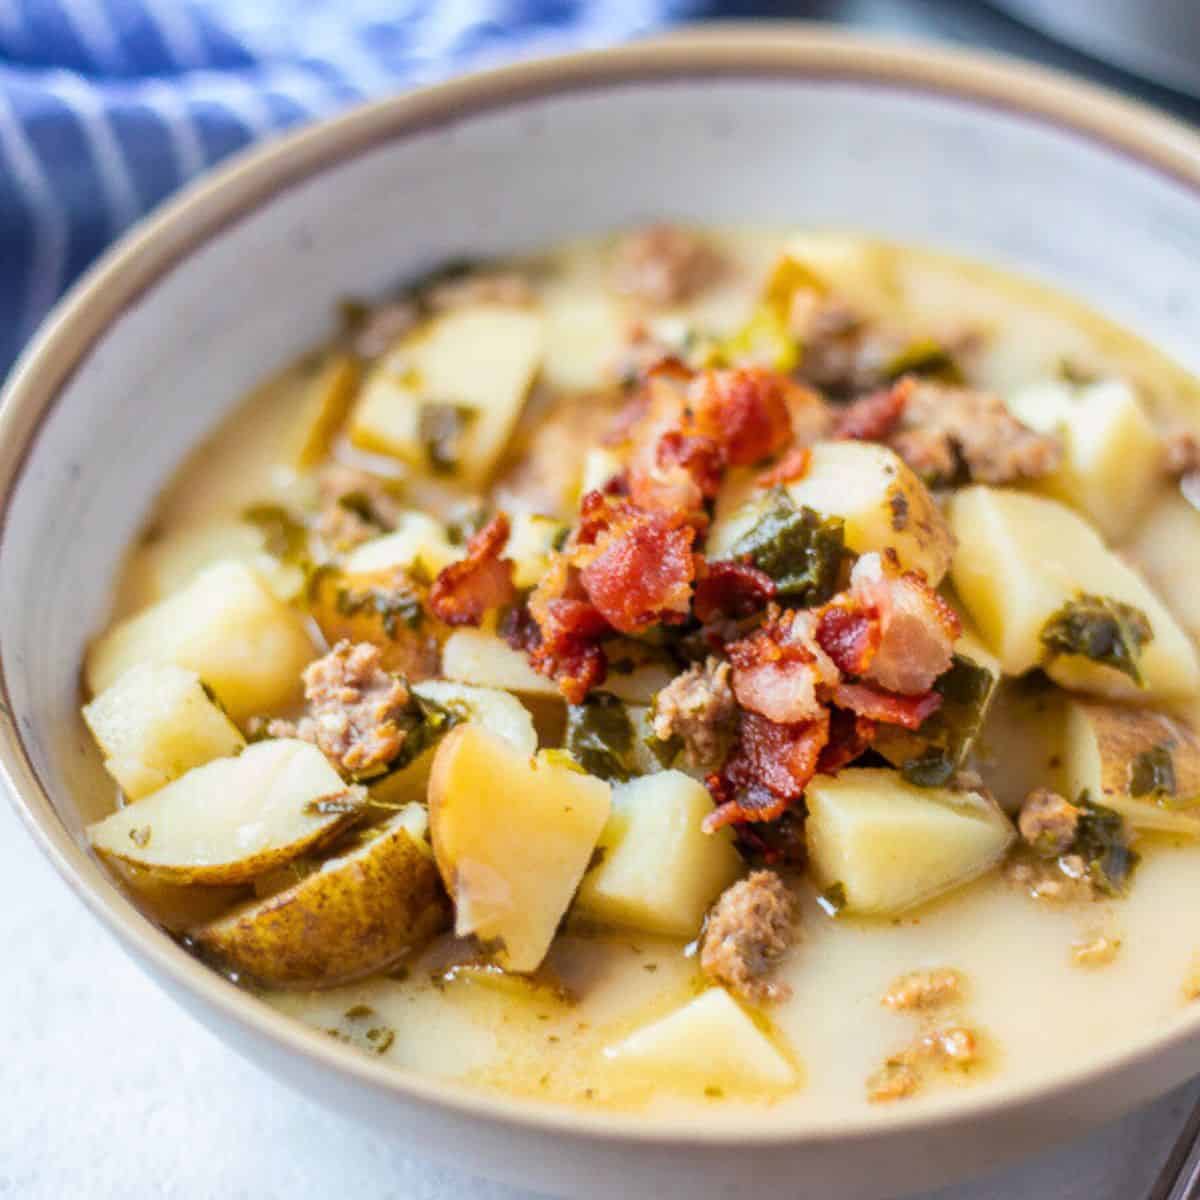 Zuppa Toscana Soup - The Cozy Cook